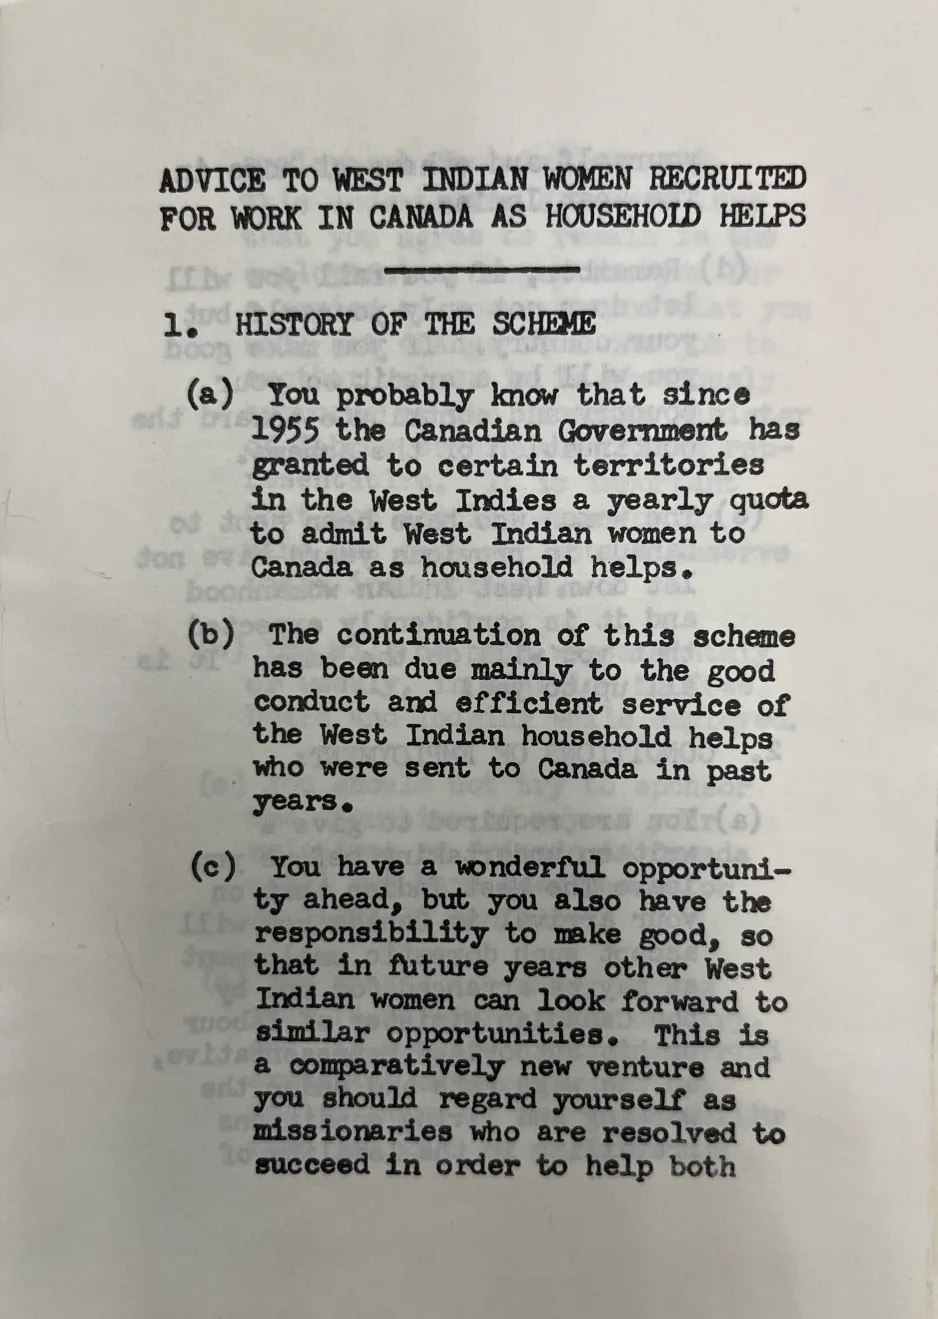 a page from the handbook "Advice To West Indian Women Recruited for Work in Canada as Household Helps"